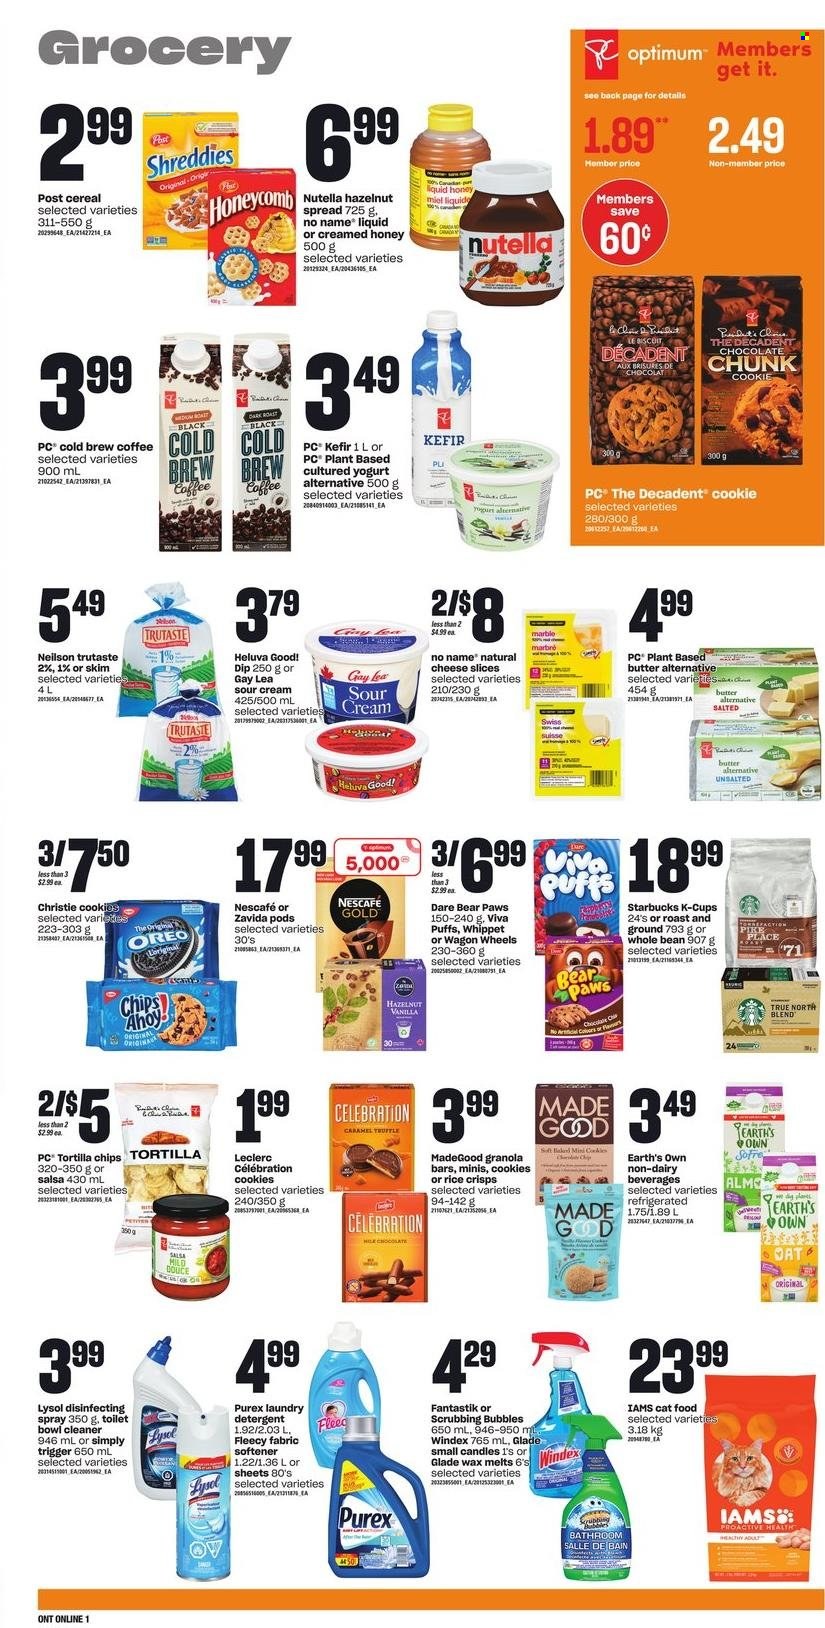 thumbnail - Zehrs Flyer - June 30, 2022 - July 06, 2022 - Sales products - puffs, No Name, sliced cheese, cheese, yoghurt, kefir, butter, sour cream, dip, cookies, chocolate, truffles, Celebration, tortilla chips, chips, rice crisps, oats, cereals, granola bar, rice, salsa, honey, hazelnut spread, coffee, coffee capsules, Starbucks, K-Cups, Windex, Scrubbing Bubbles, cleaner, Lysol, fabric softener, laundry detergent, Purex, candle, Glade, animal food, Paws, cat food, Optimum, Iams, wagon, detergent, Nutella, Oreo, Nescafé. Page 5.